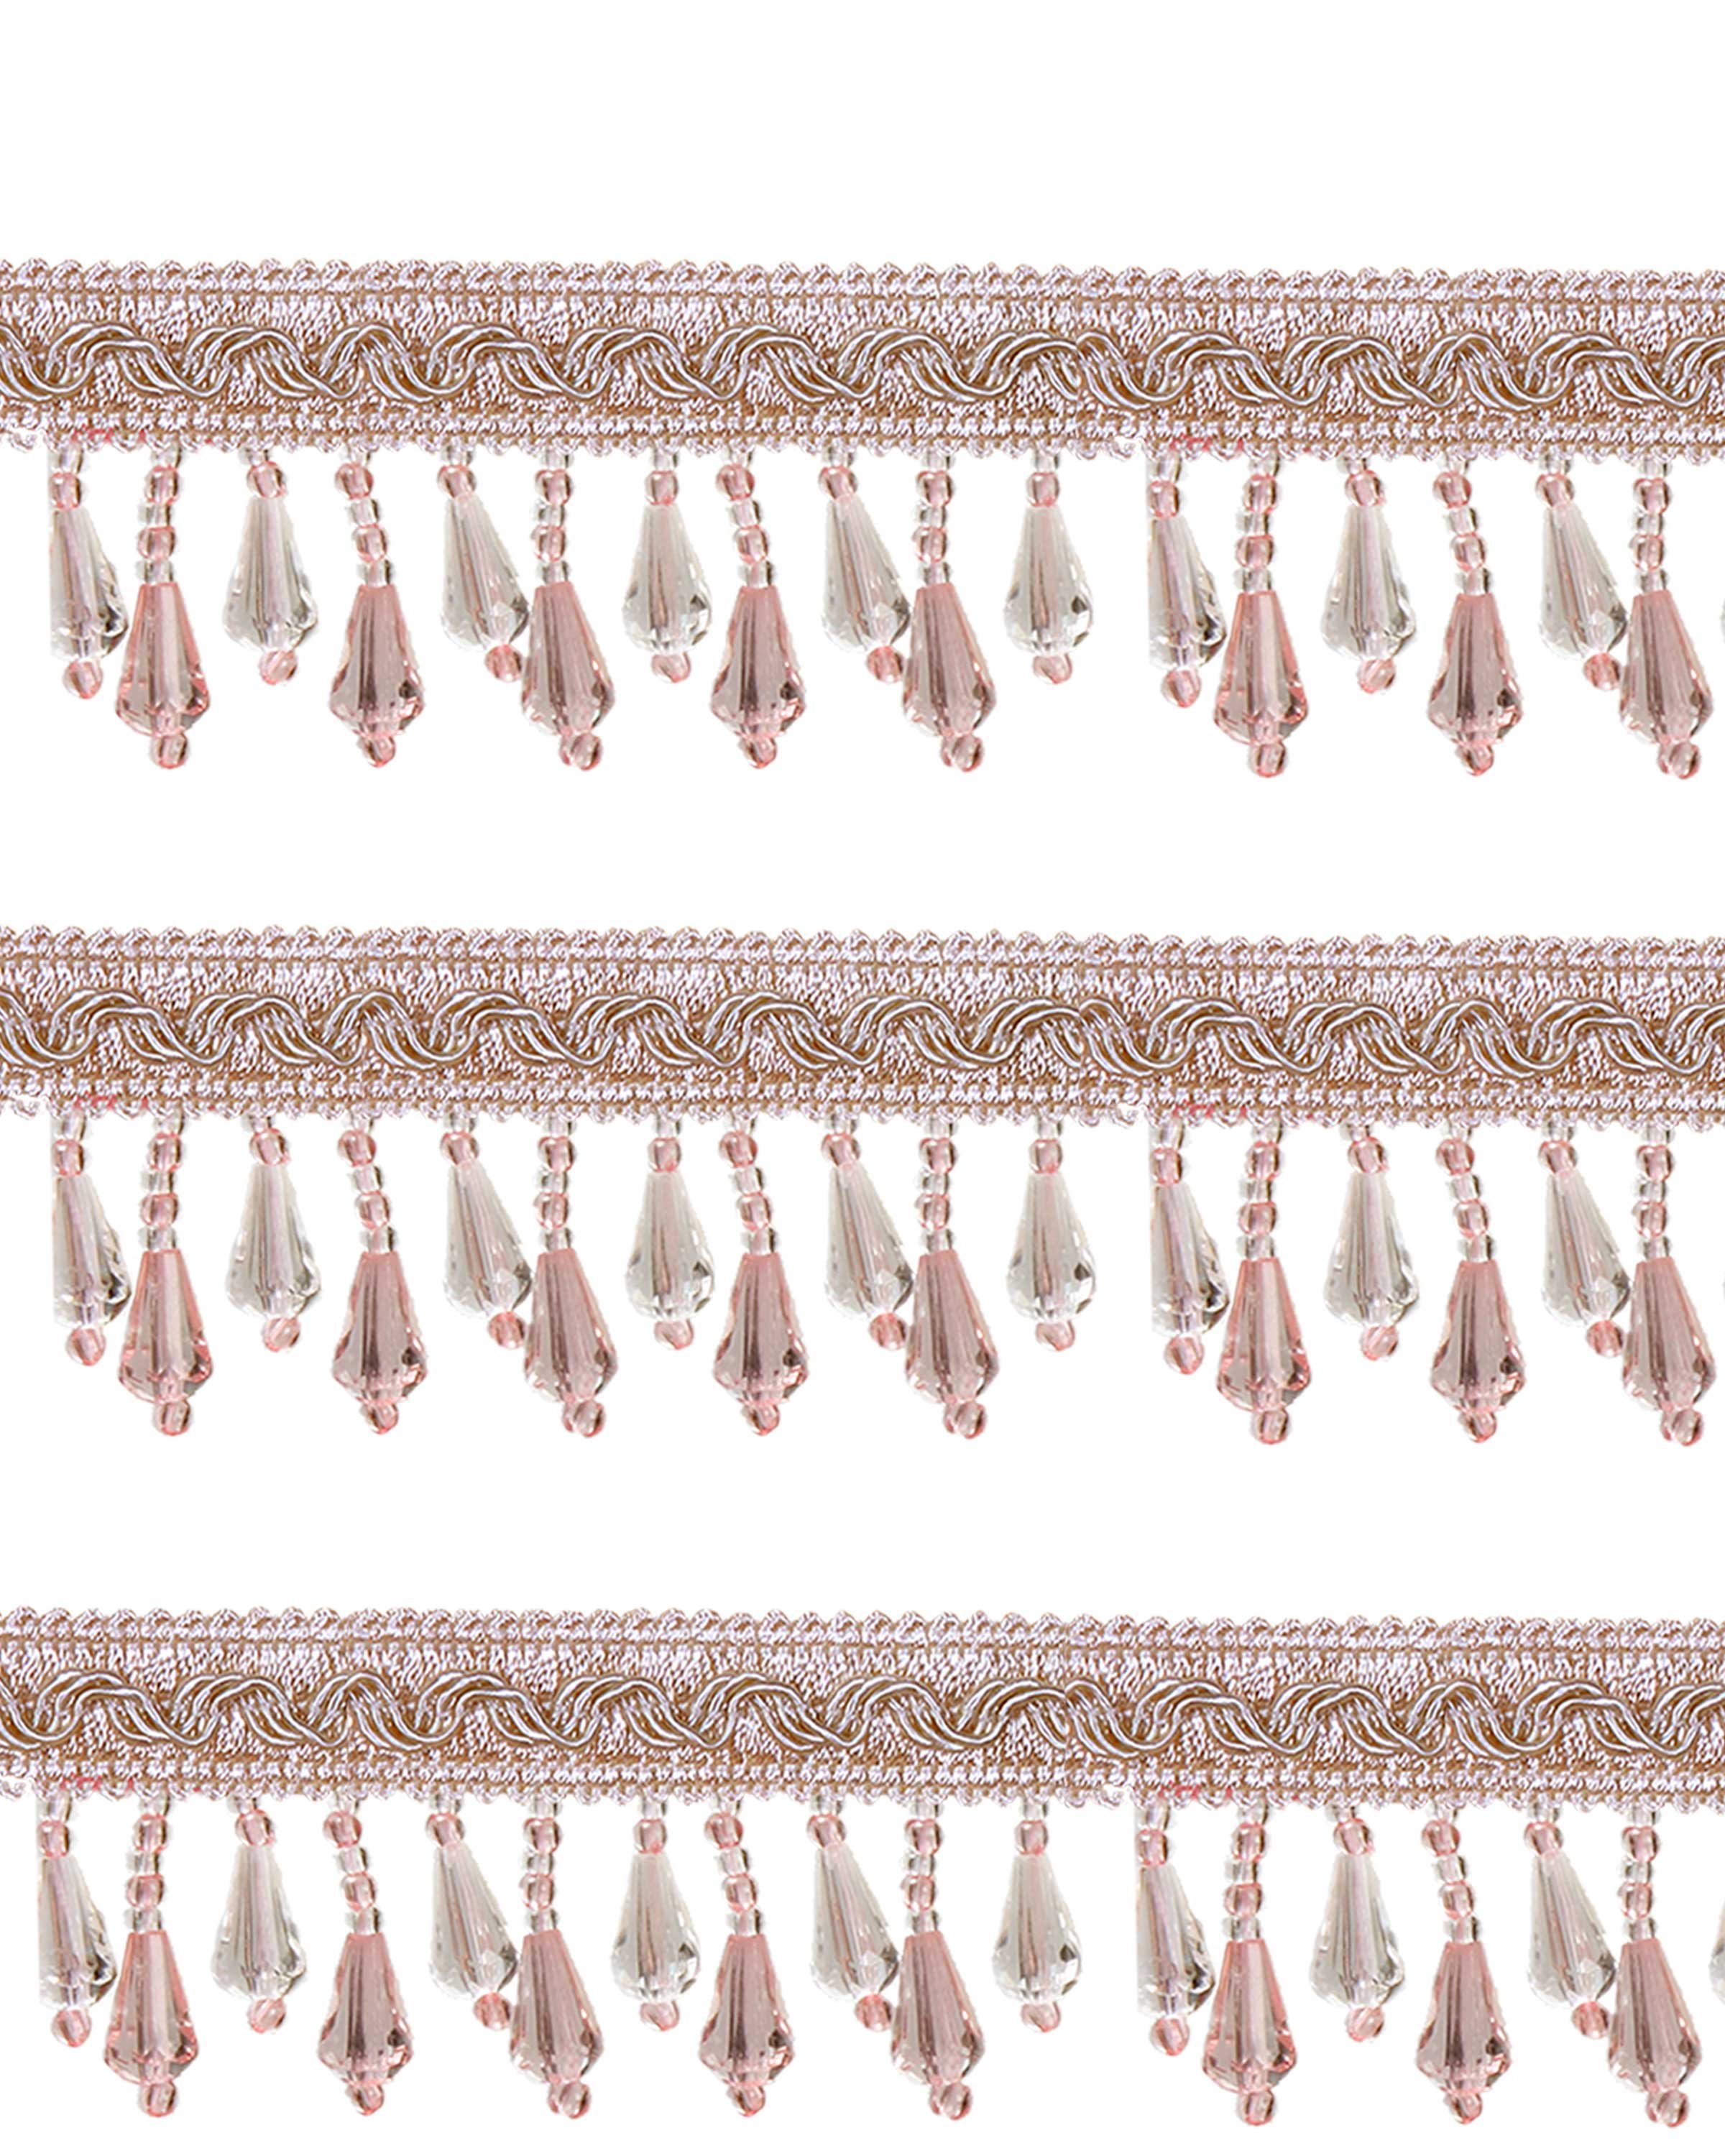 Short Fringe Beading - Pink Acrylic 40mm Price is for 5 metres